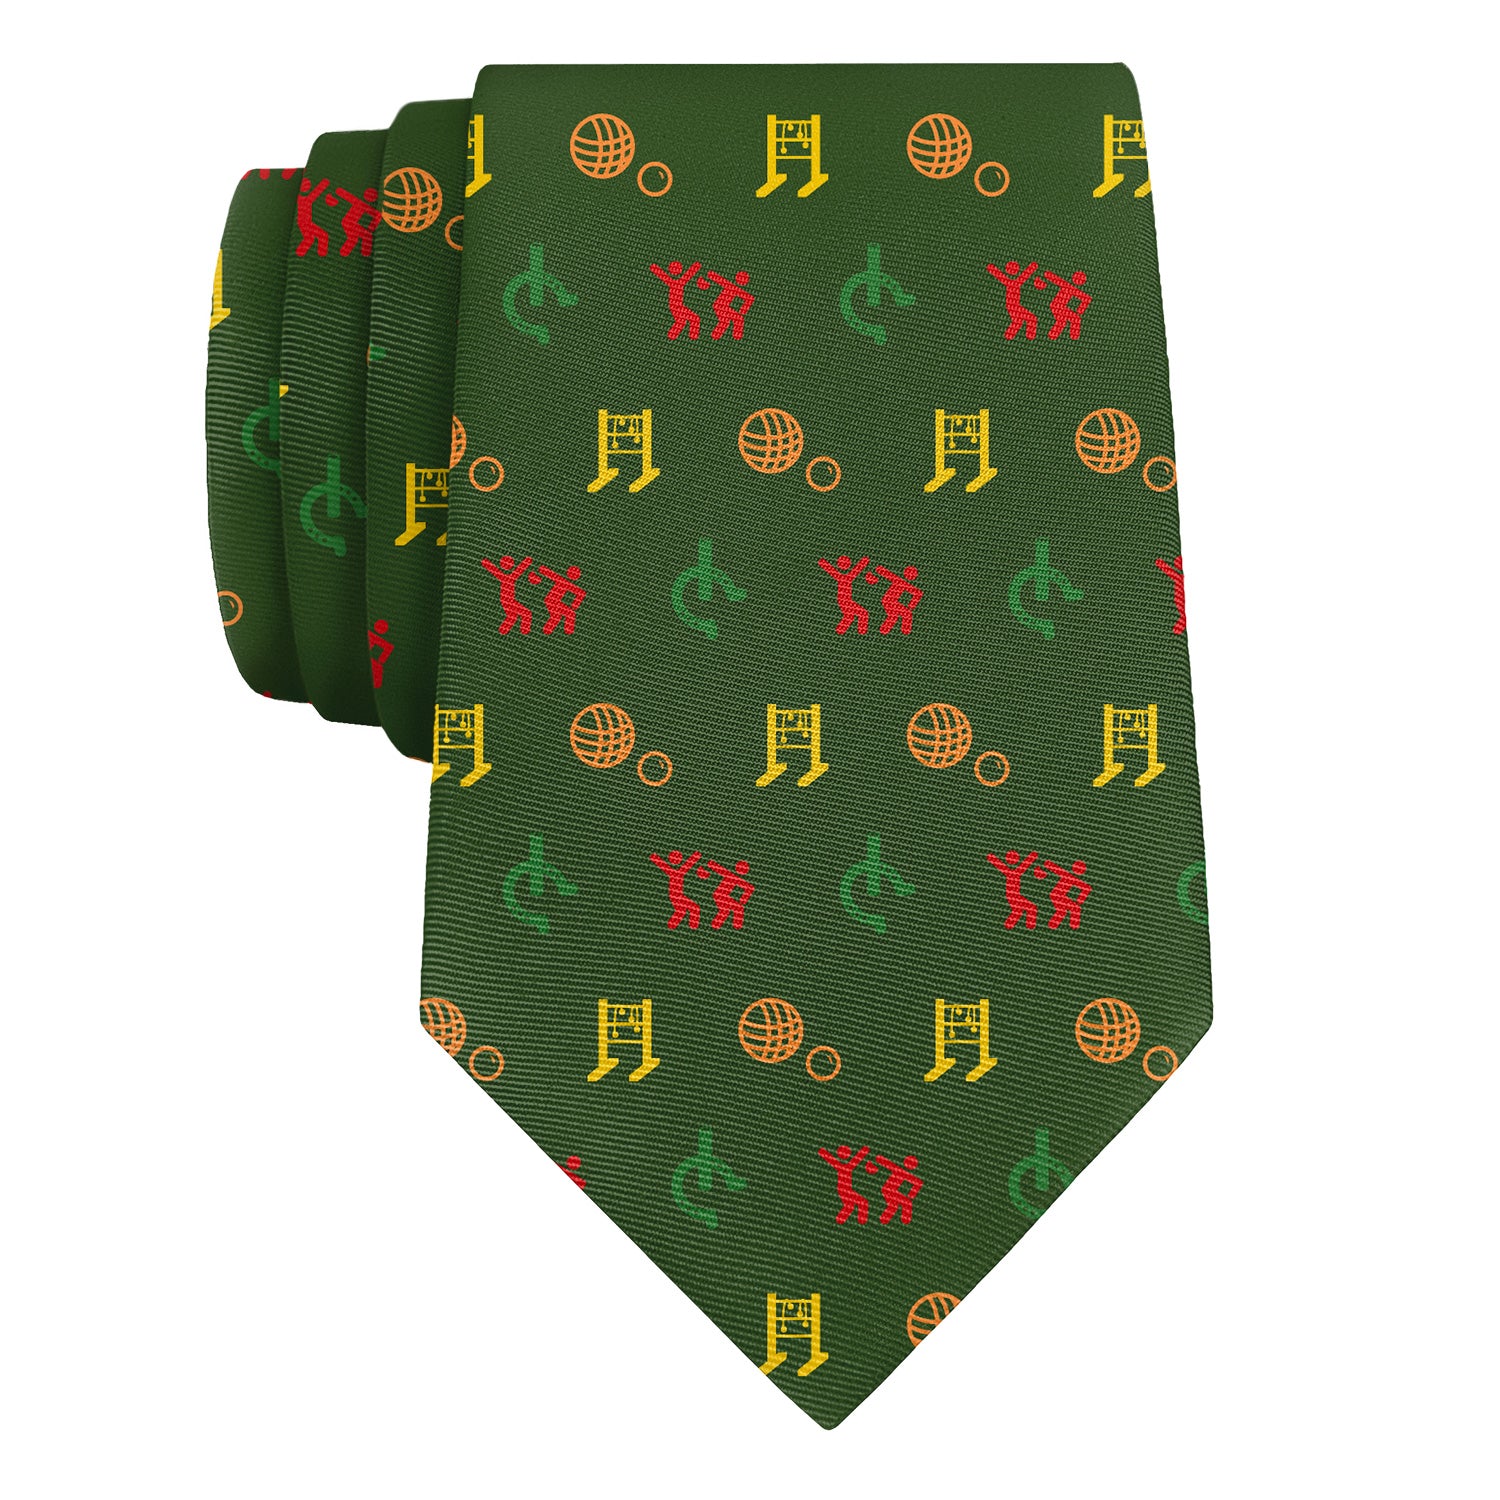 Lawn Games With Friends Necktie - Knotty 2.75" -  - Knotty Tie Co.